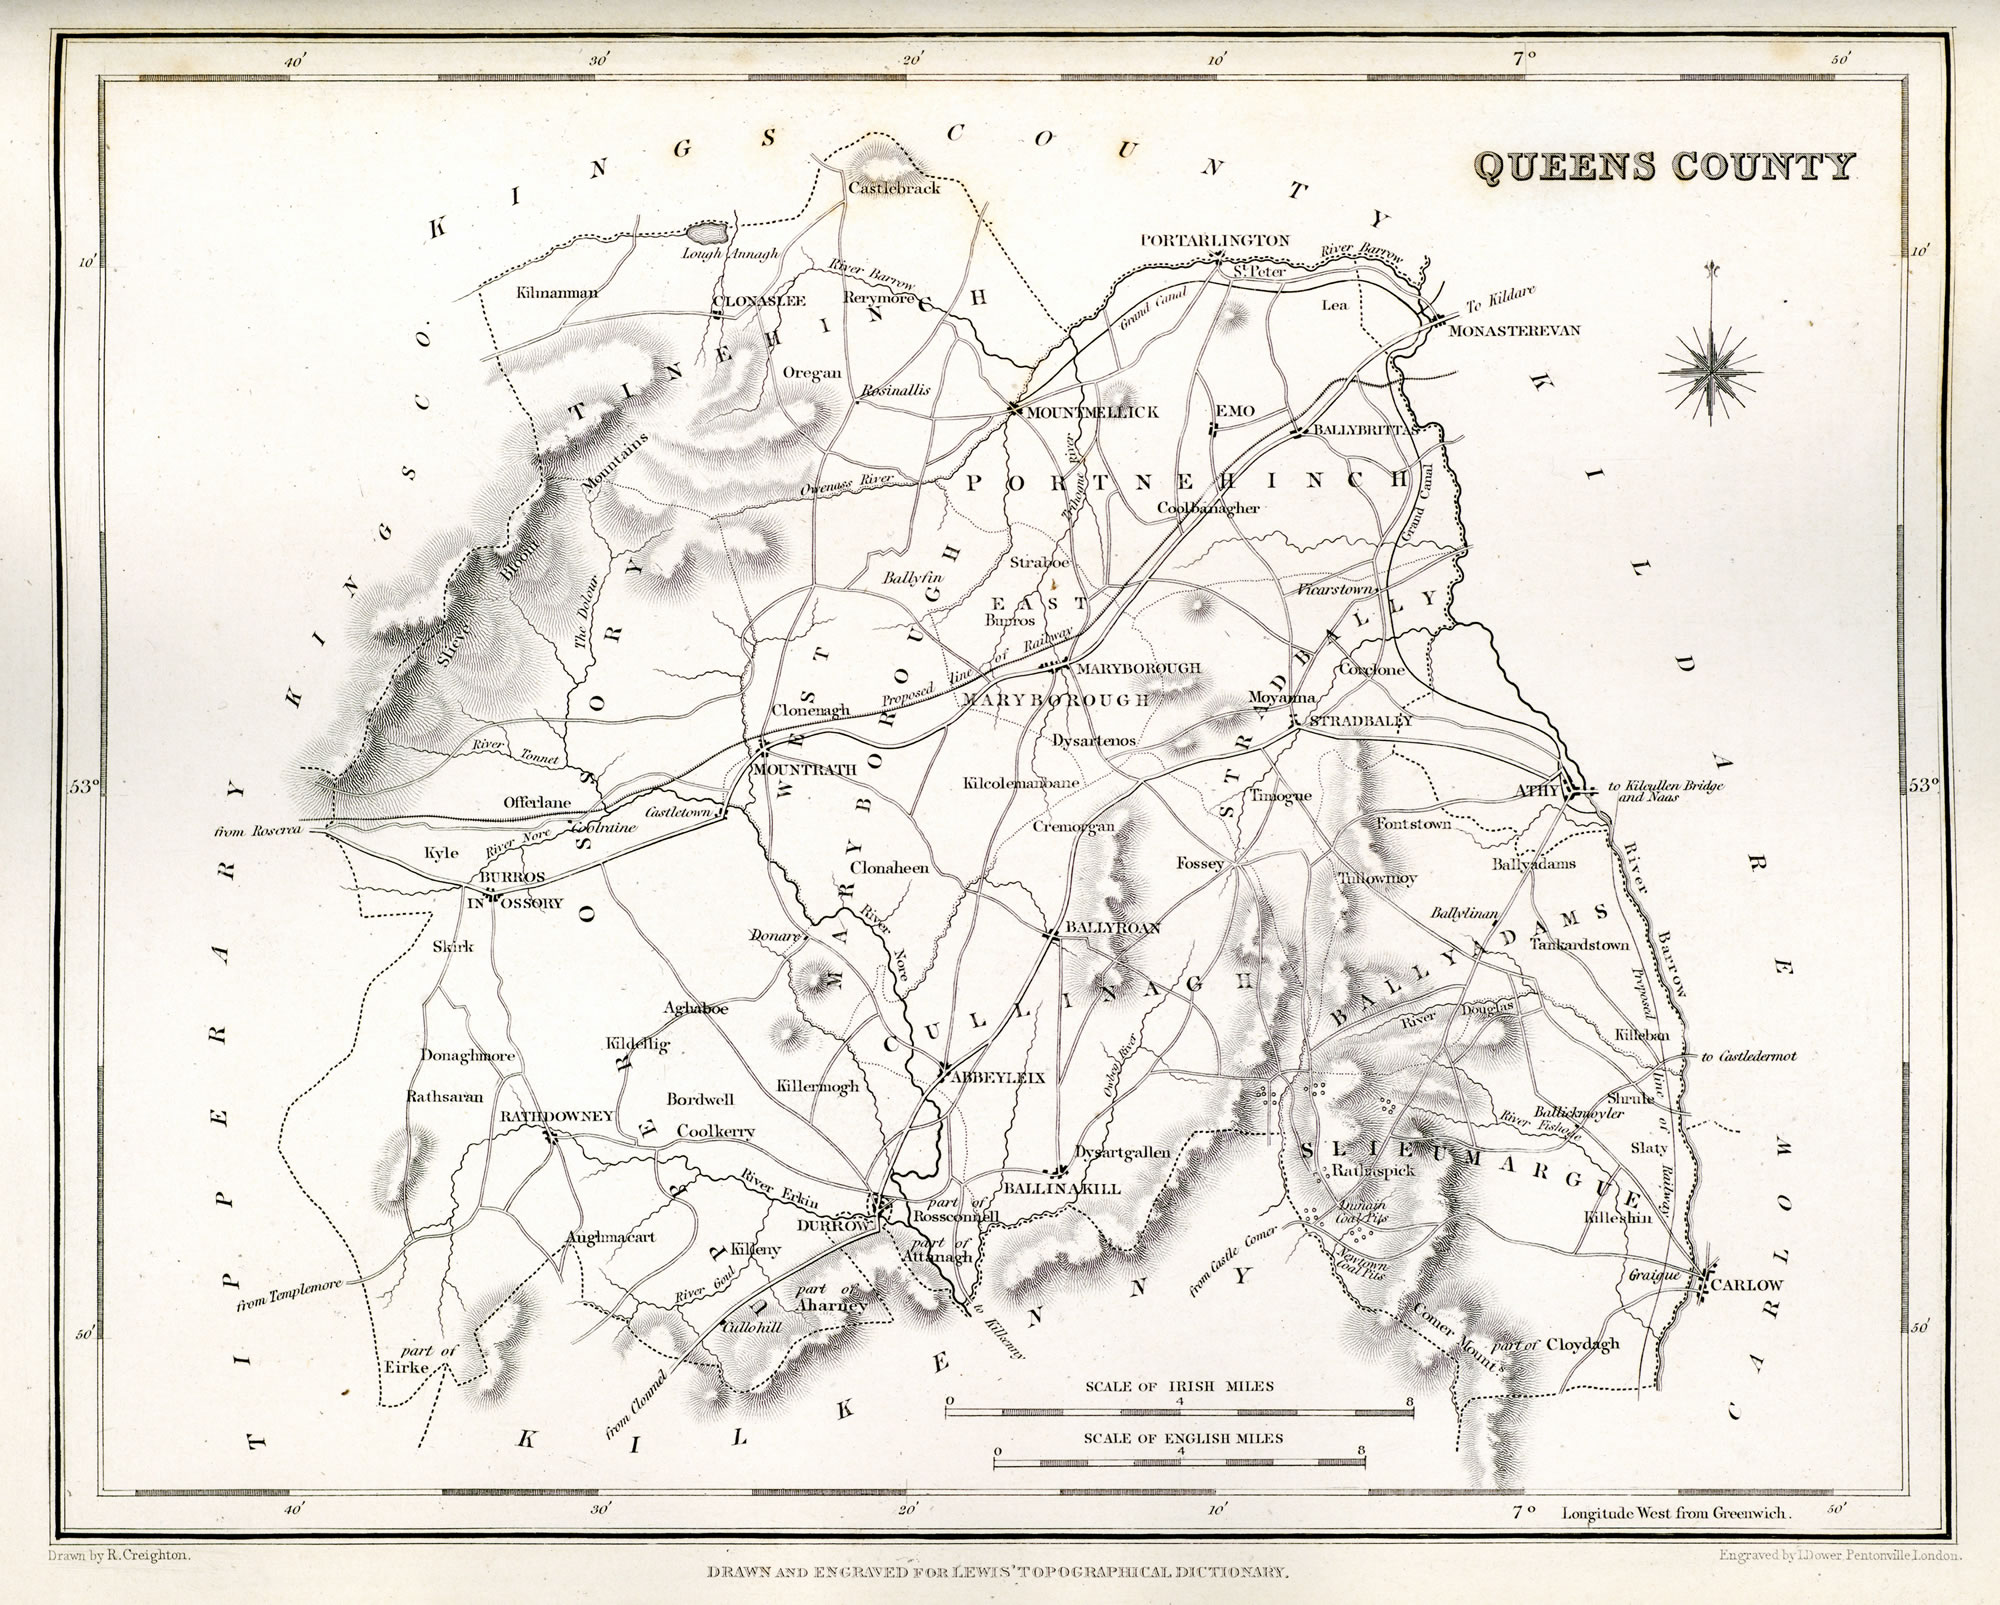 County Laois was known as Queen's County from 1556-1922